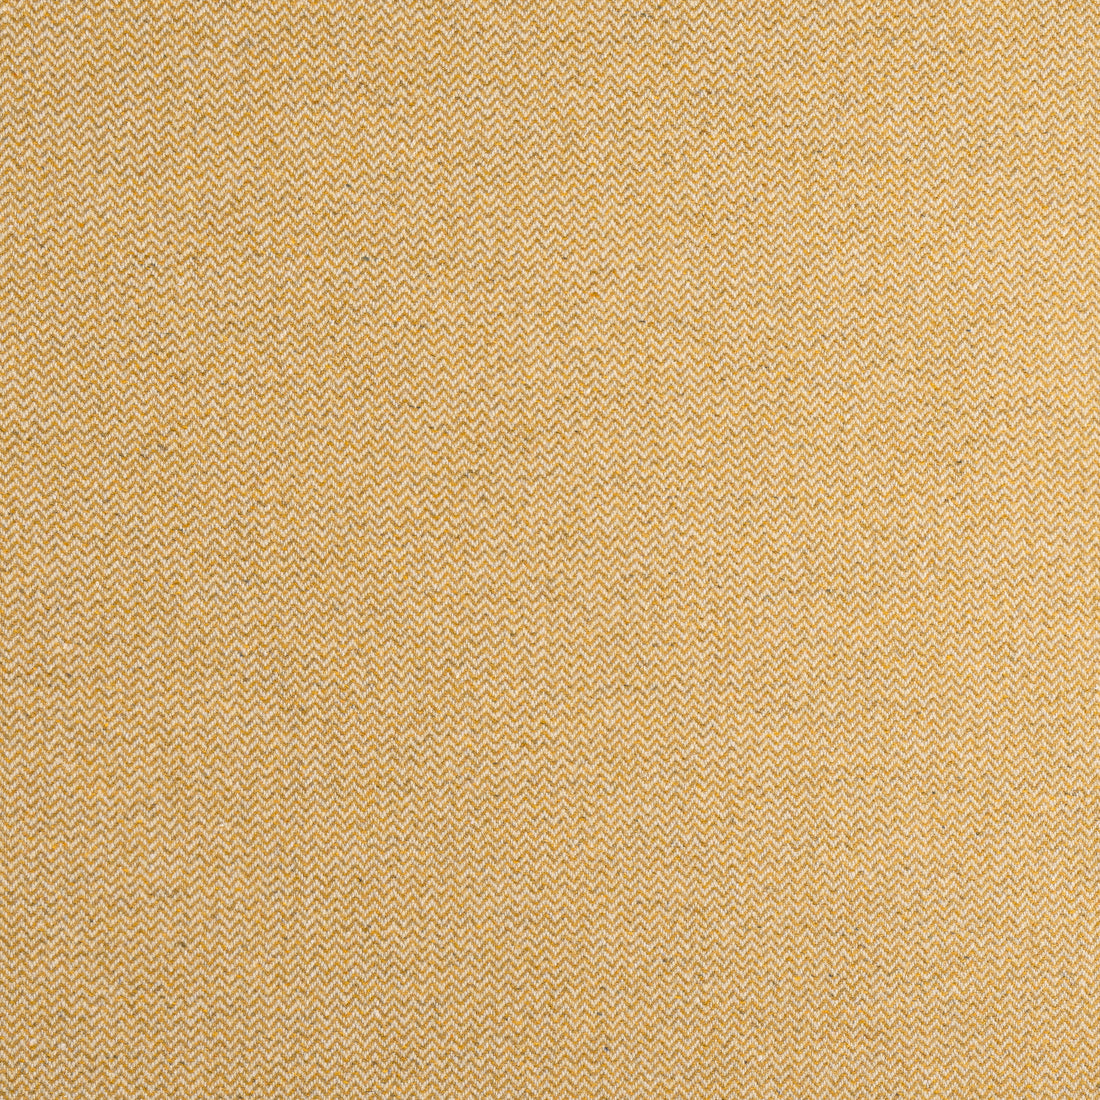 Dorset fabric in honey color - pattern number W80905 - by Thibaut in the Dunmore collection